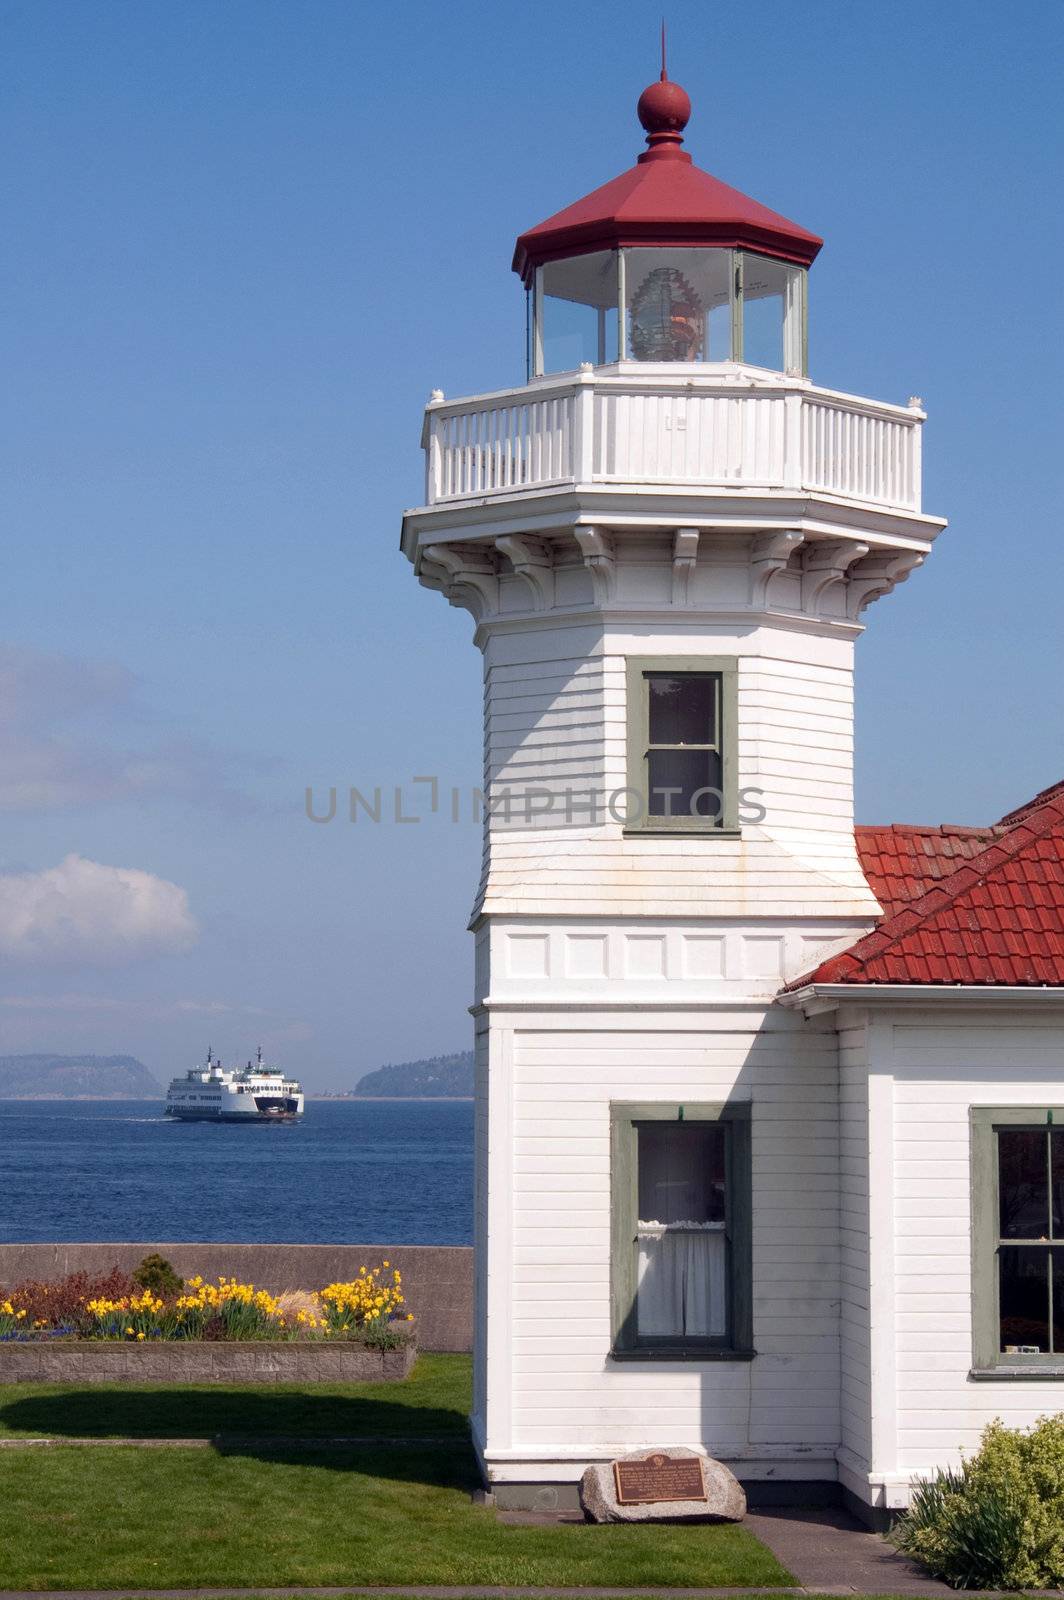 West Coast Lighthouse & Ferry by ChrisBoswell